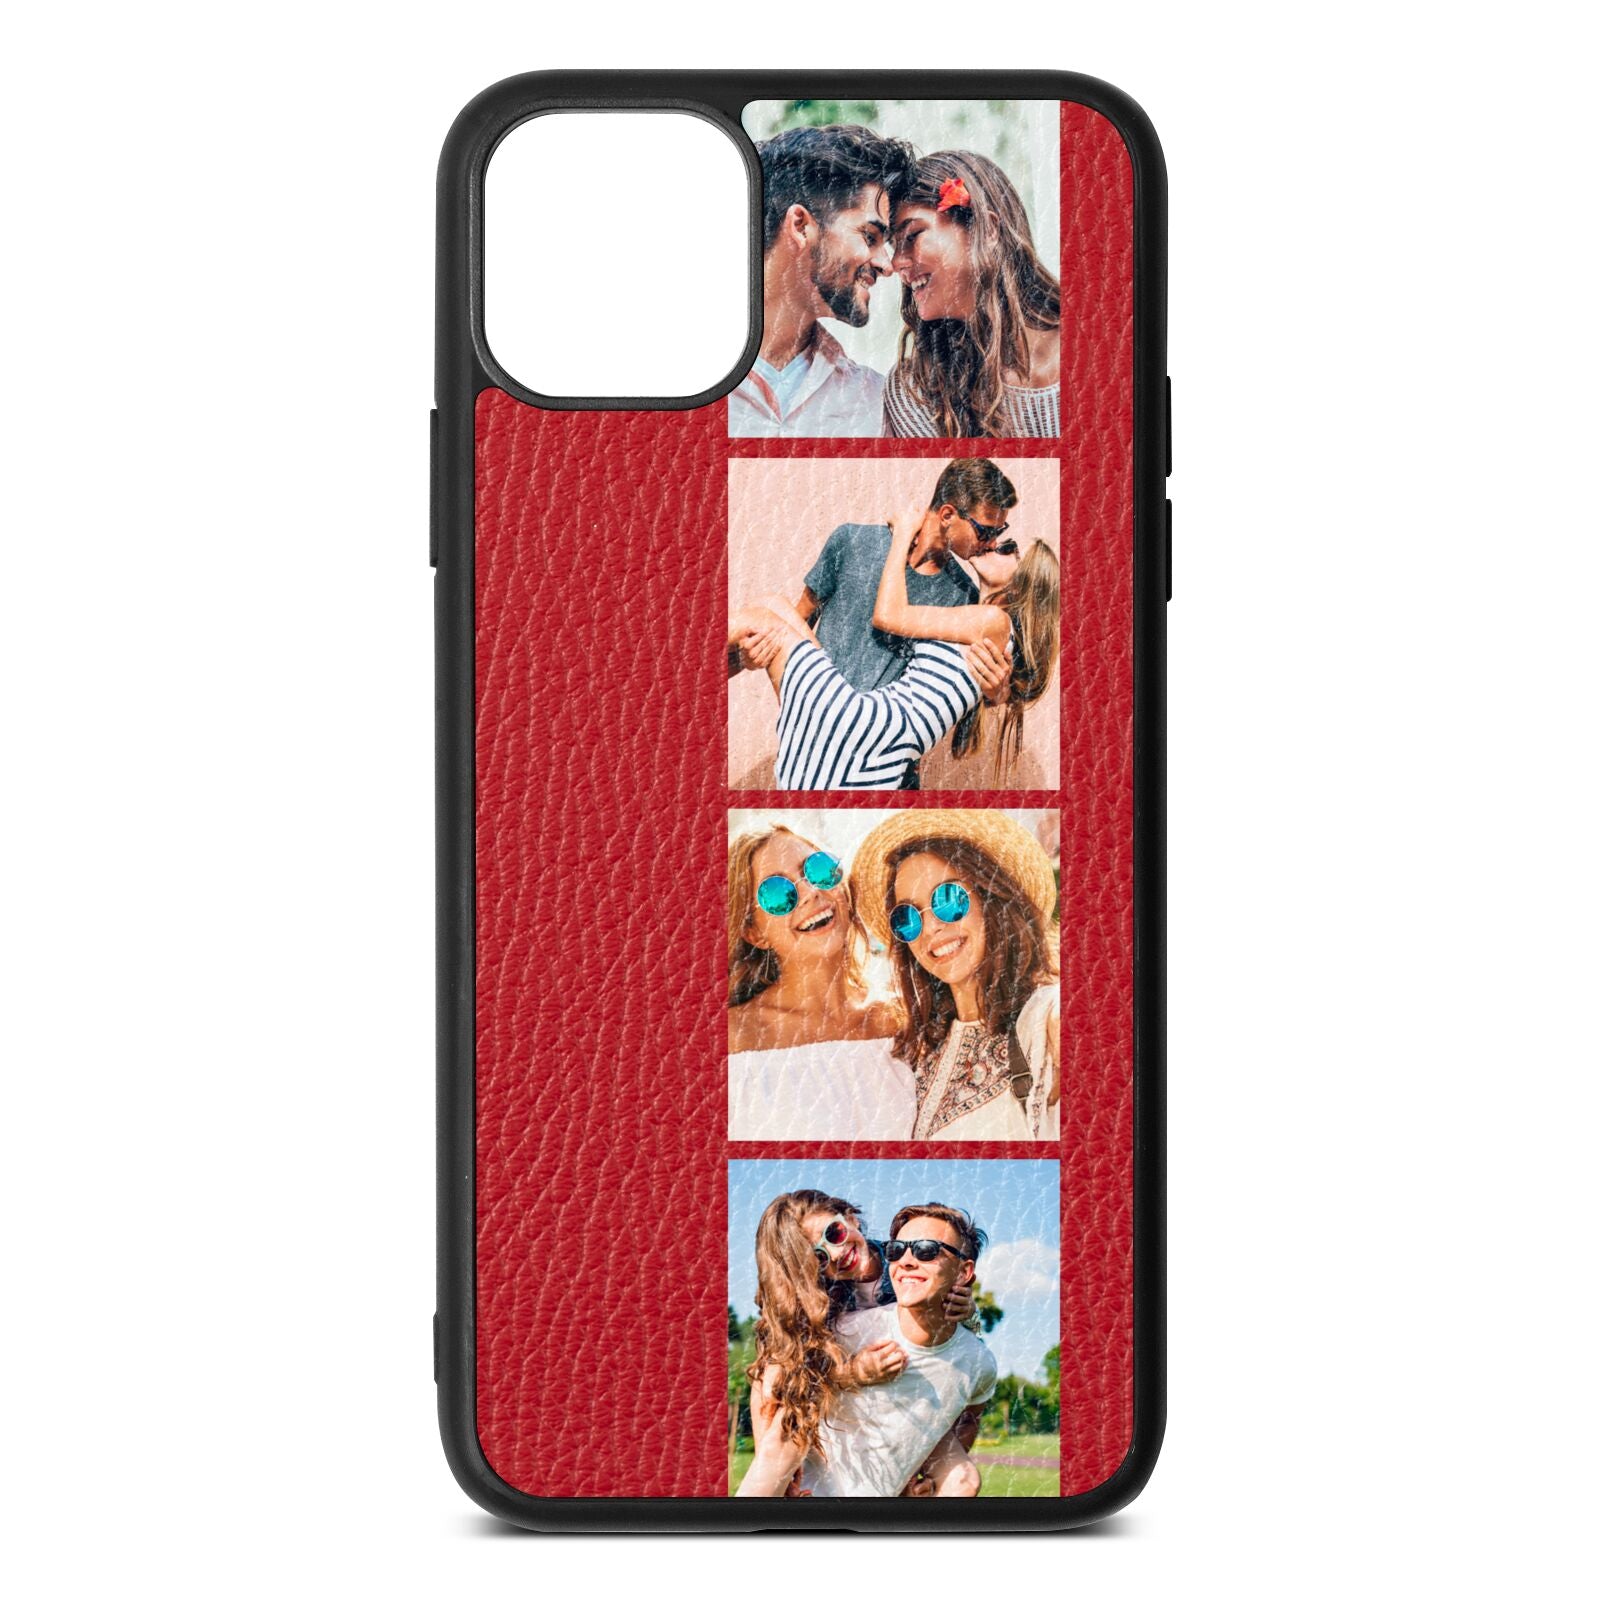 Photo Strip Montage Upload Red Pebble Leather iPhone 11 Pro Max Case